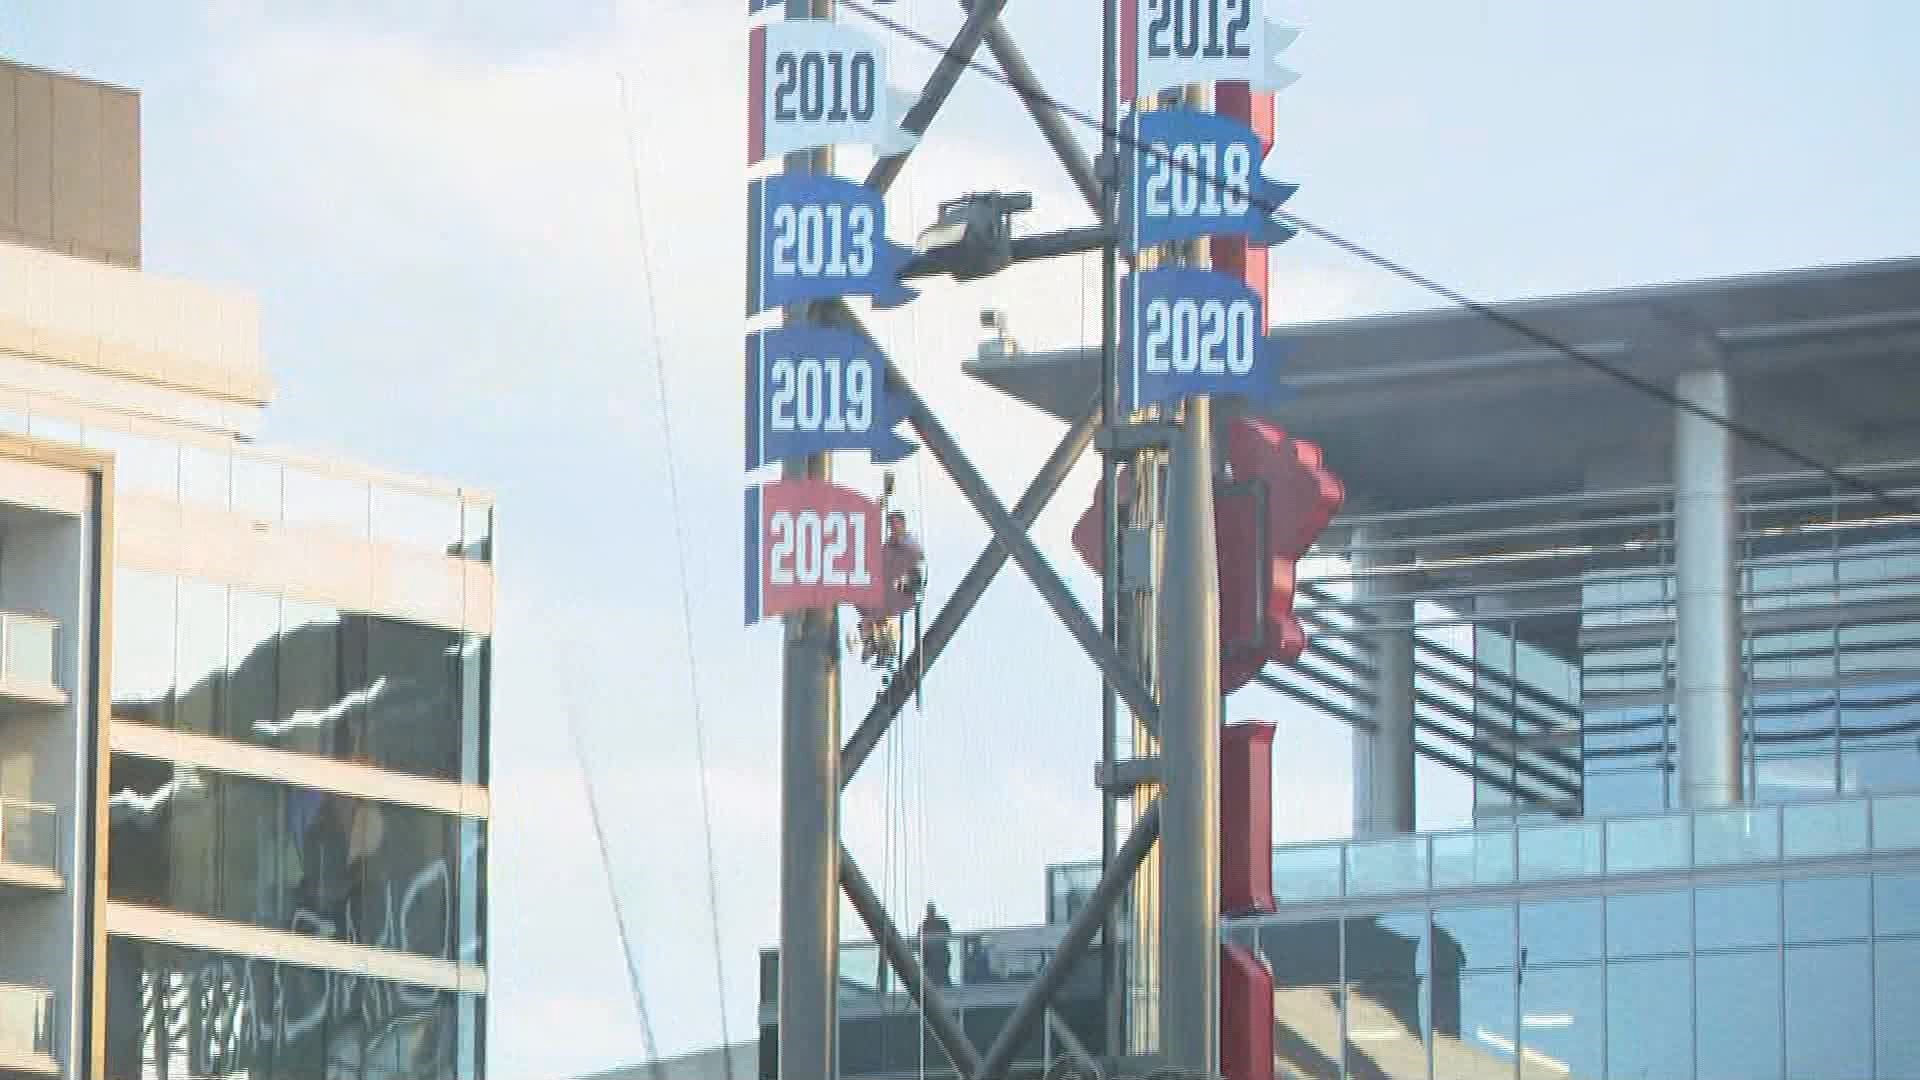 On Opening Day of the season, the Braves unveiled the 2021 World Series pennant.